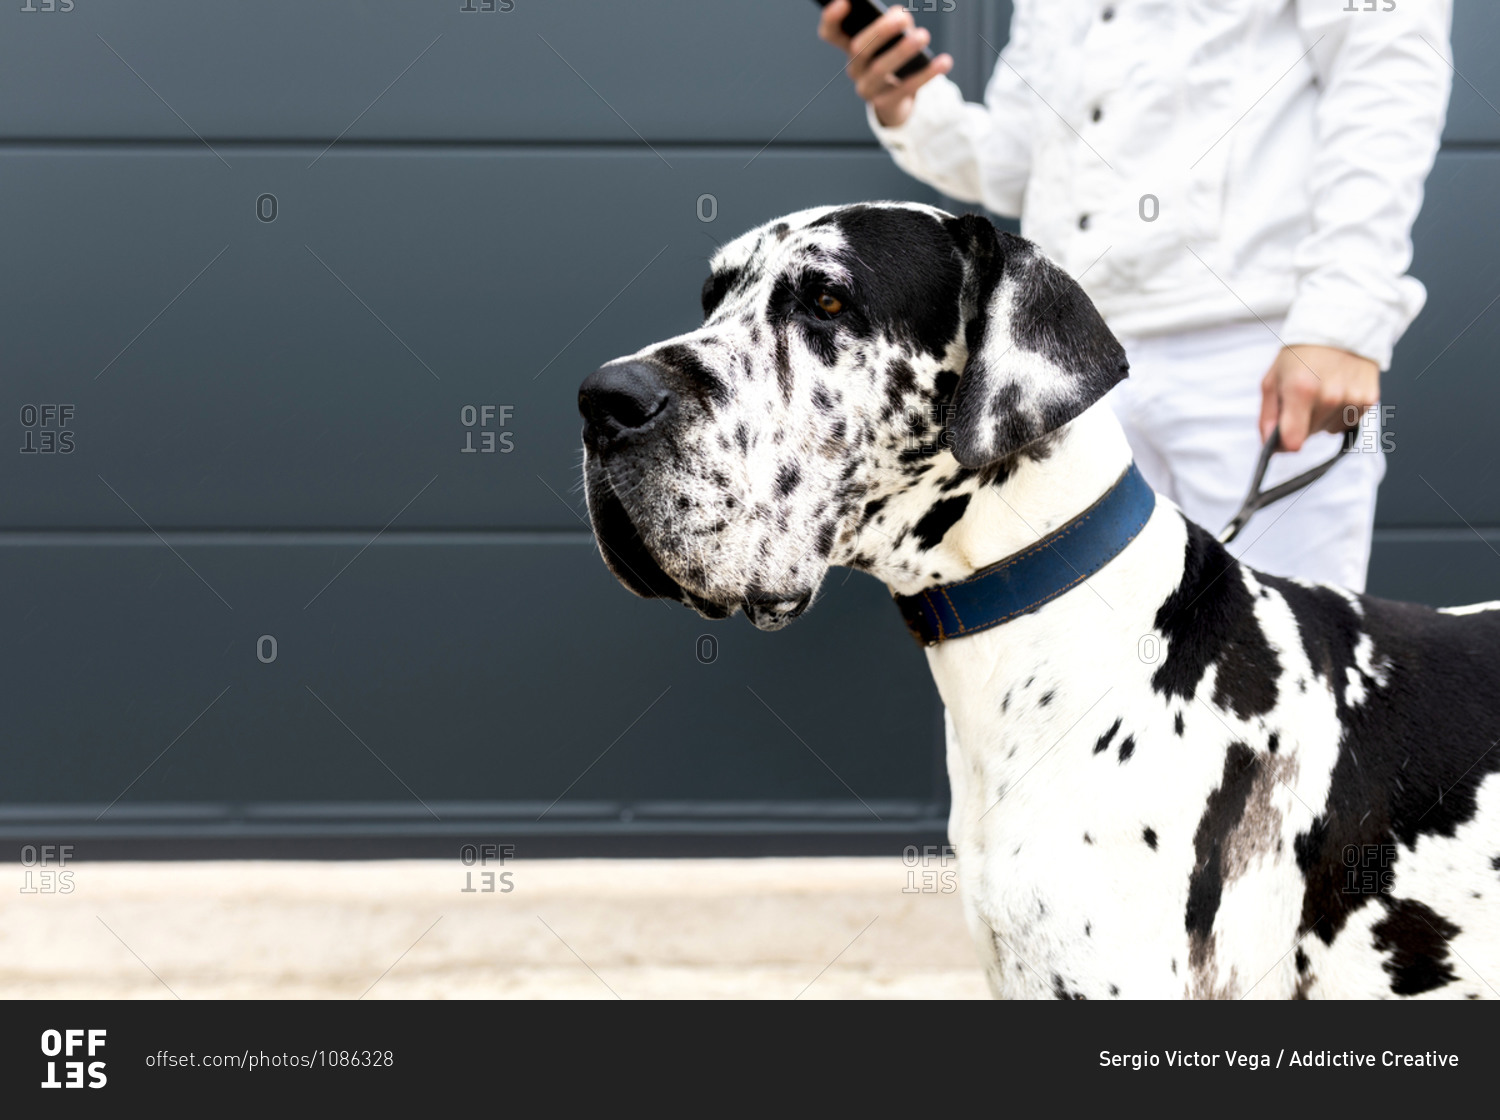 Crop young male cuddling Great Dane dog and browsing smartphone while standing together in city